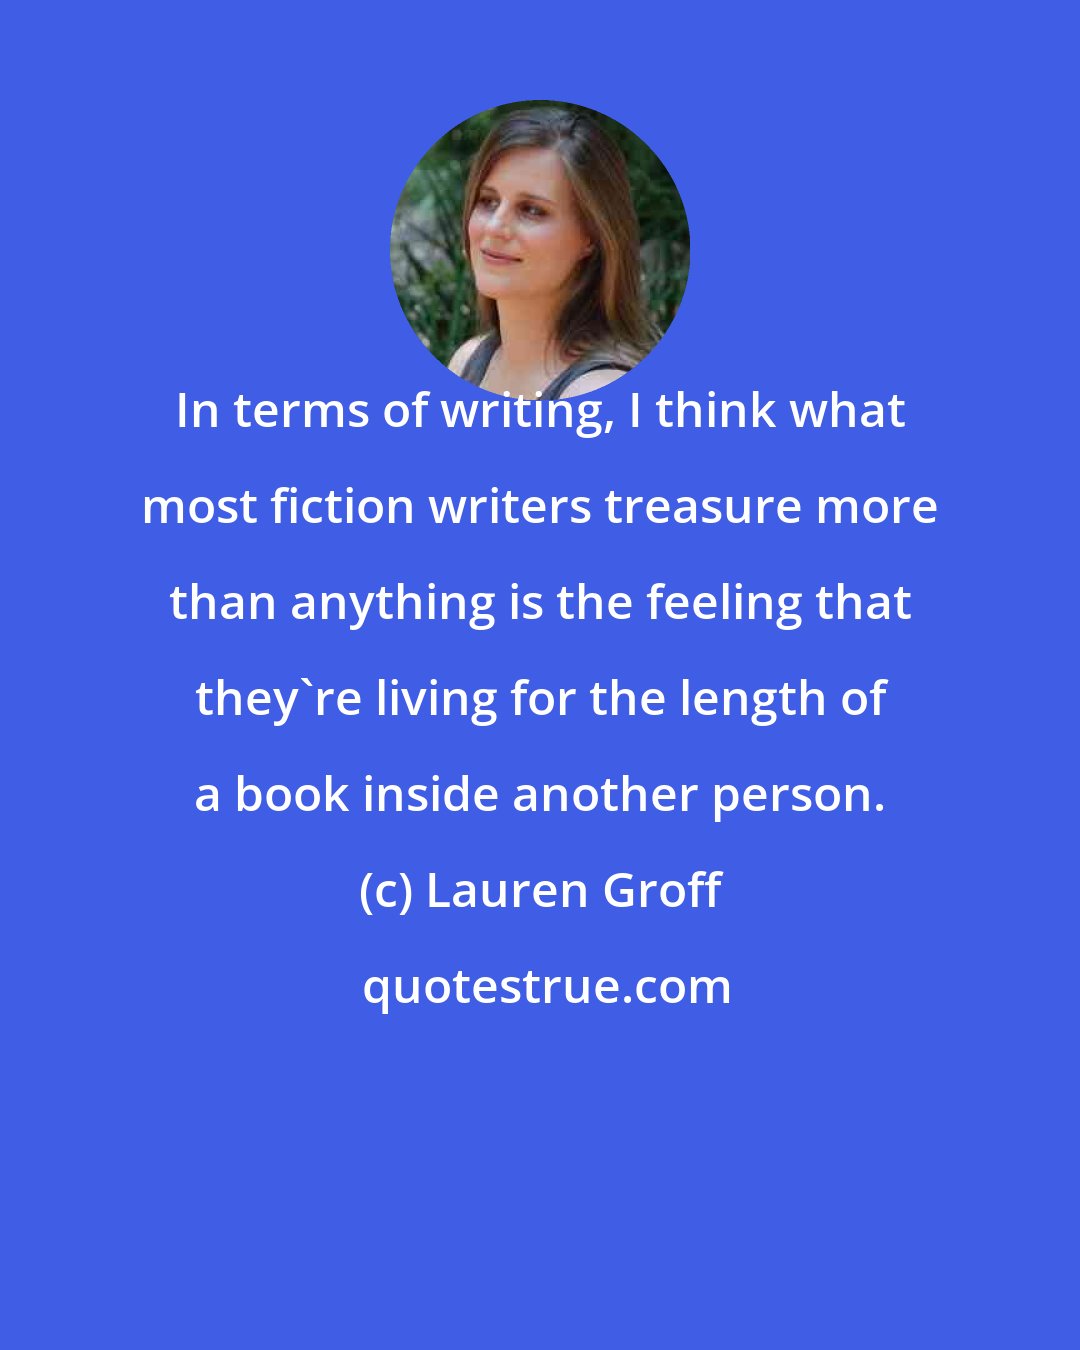 Lauren Groff: In terms of writing, I think what most fiction writers treasure more than anything is the feeling that they're living for the length of a book inside another person.